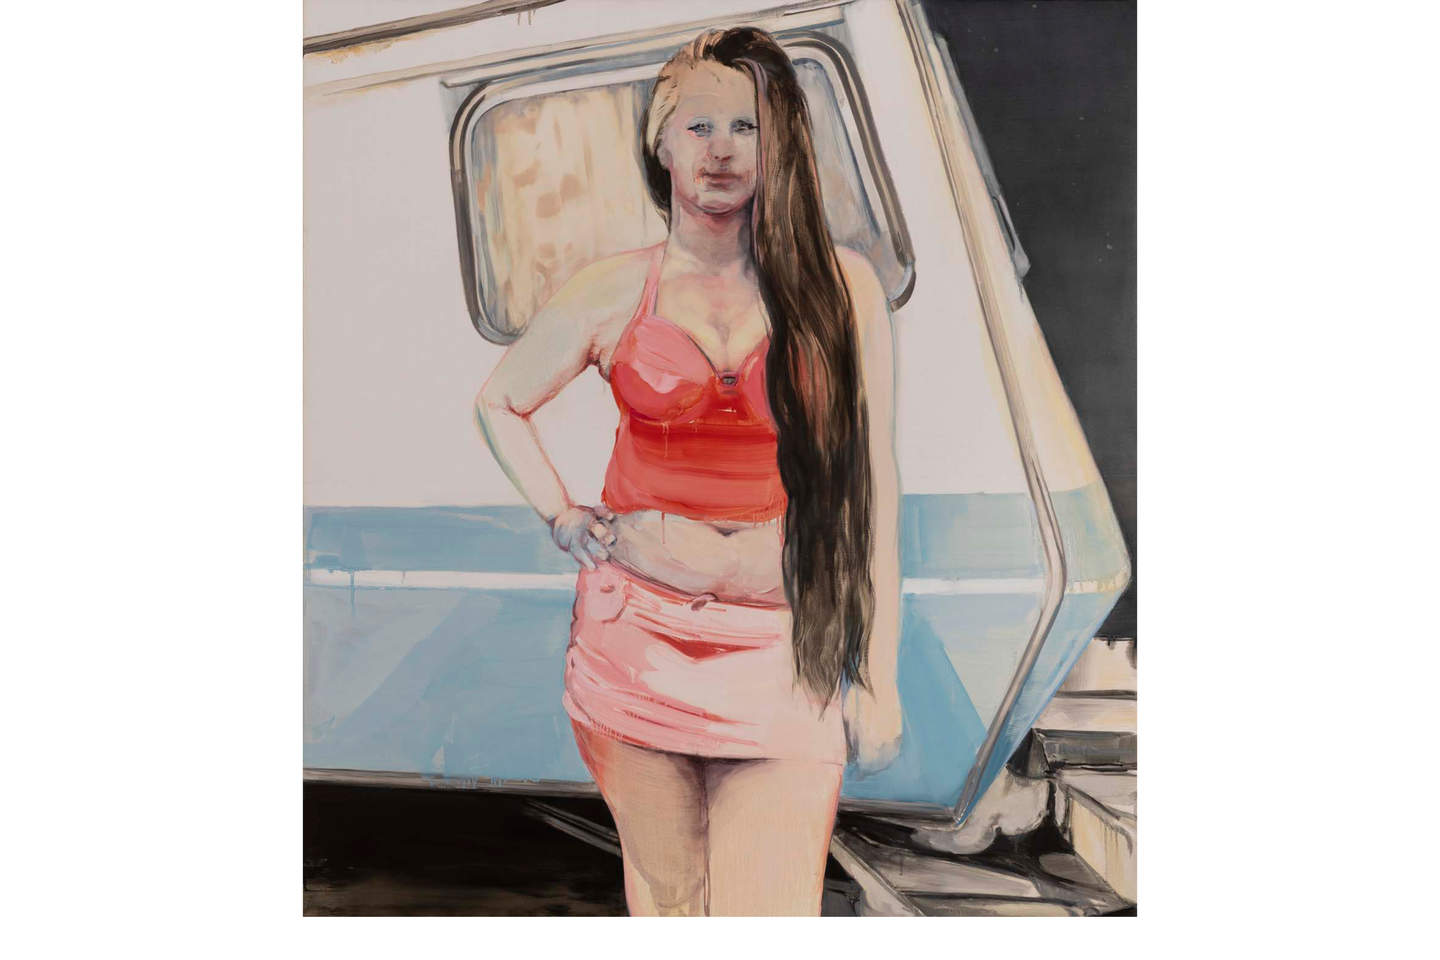 A young woman wearing a red halter neck top revealing her plump stomach poses in front of a 1970s caravan.